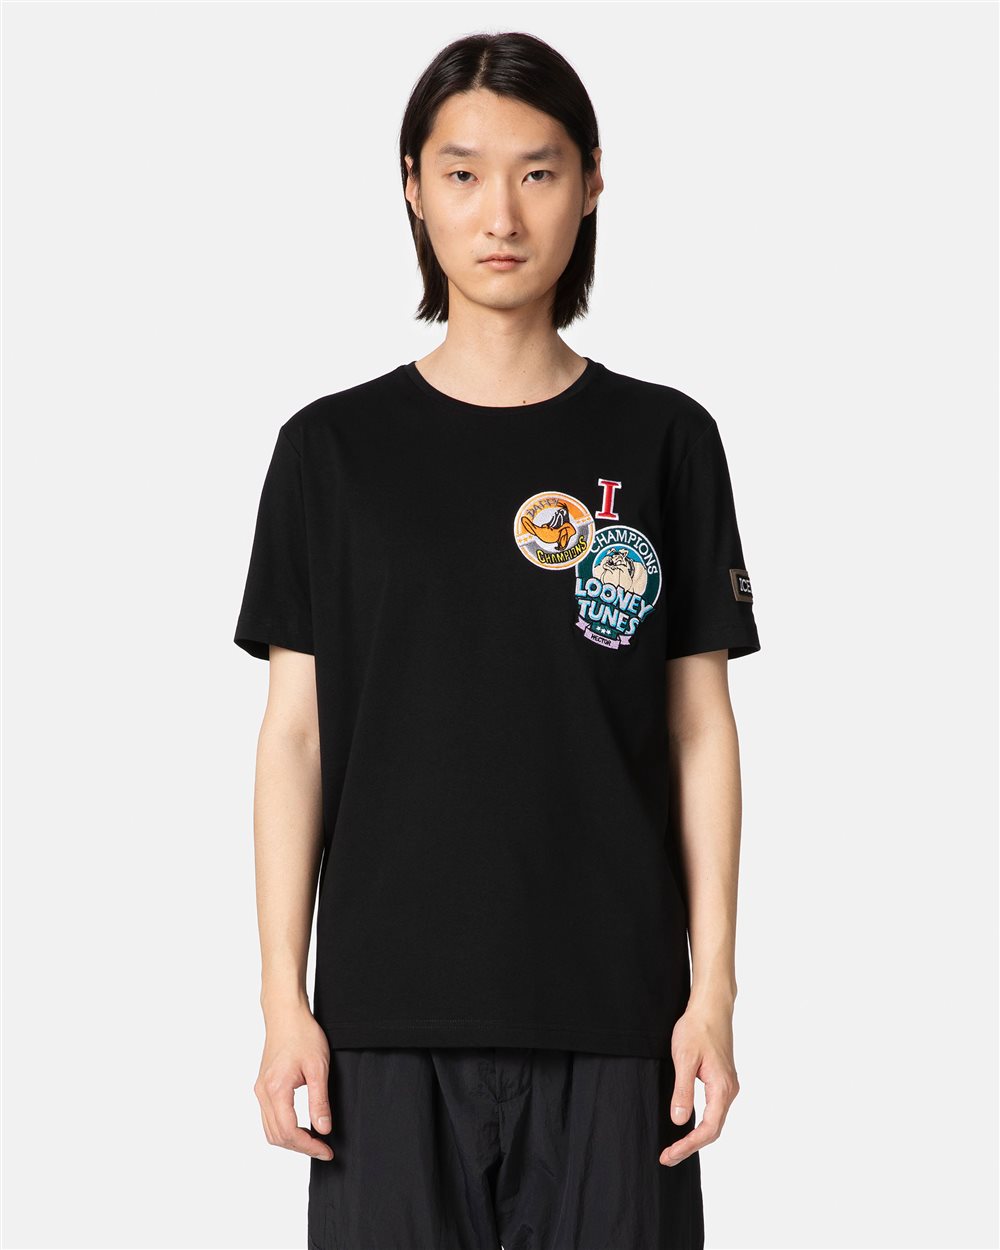 Black T-shirt with cartoon patch - Iceberg - Official Website